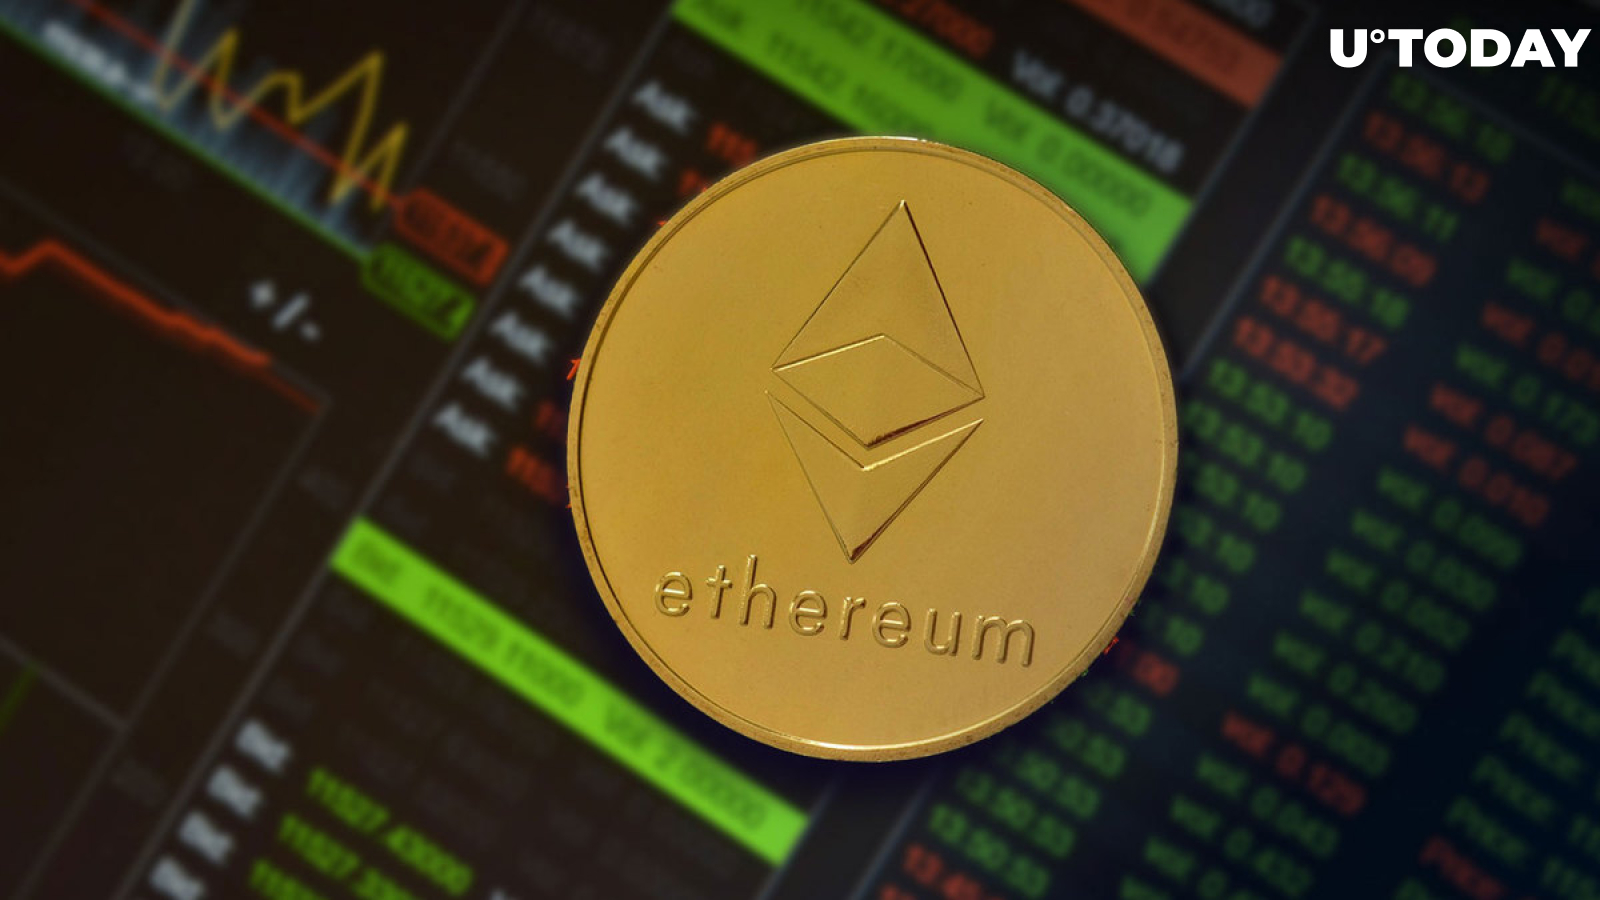 Ethereum (ETH) Tremendously Undervalued at Current Prices, Prominent Trader Says